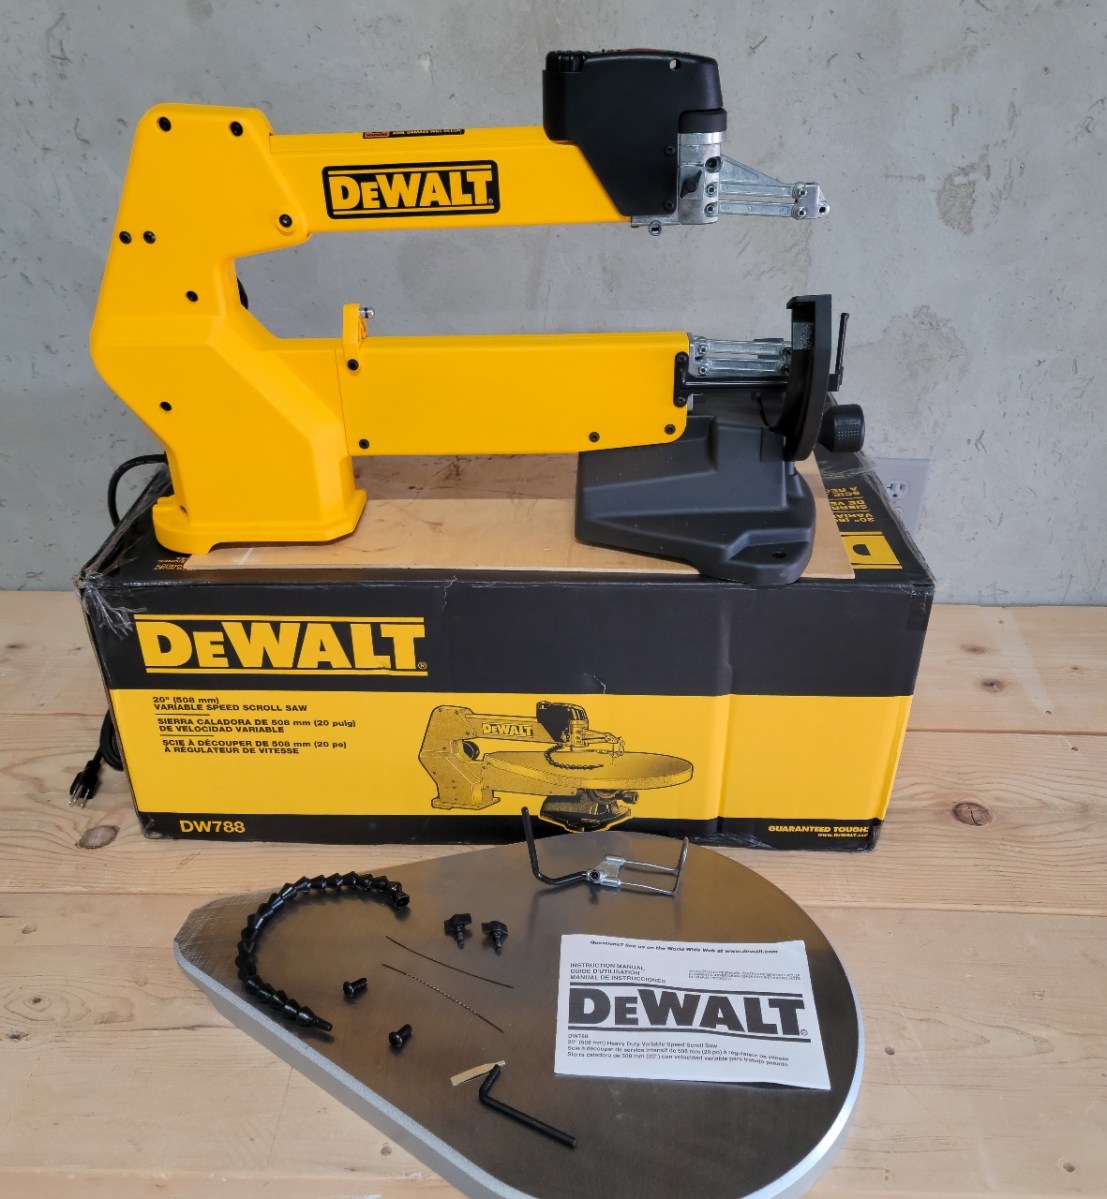 The DeWalt skill saw on top of its box and next to the small number of pieces that require assembly.